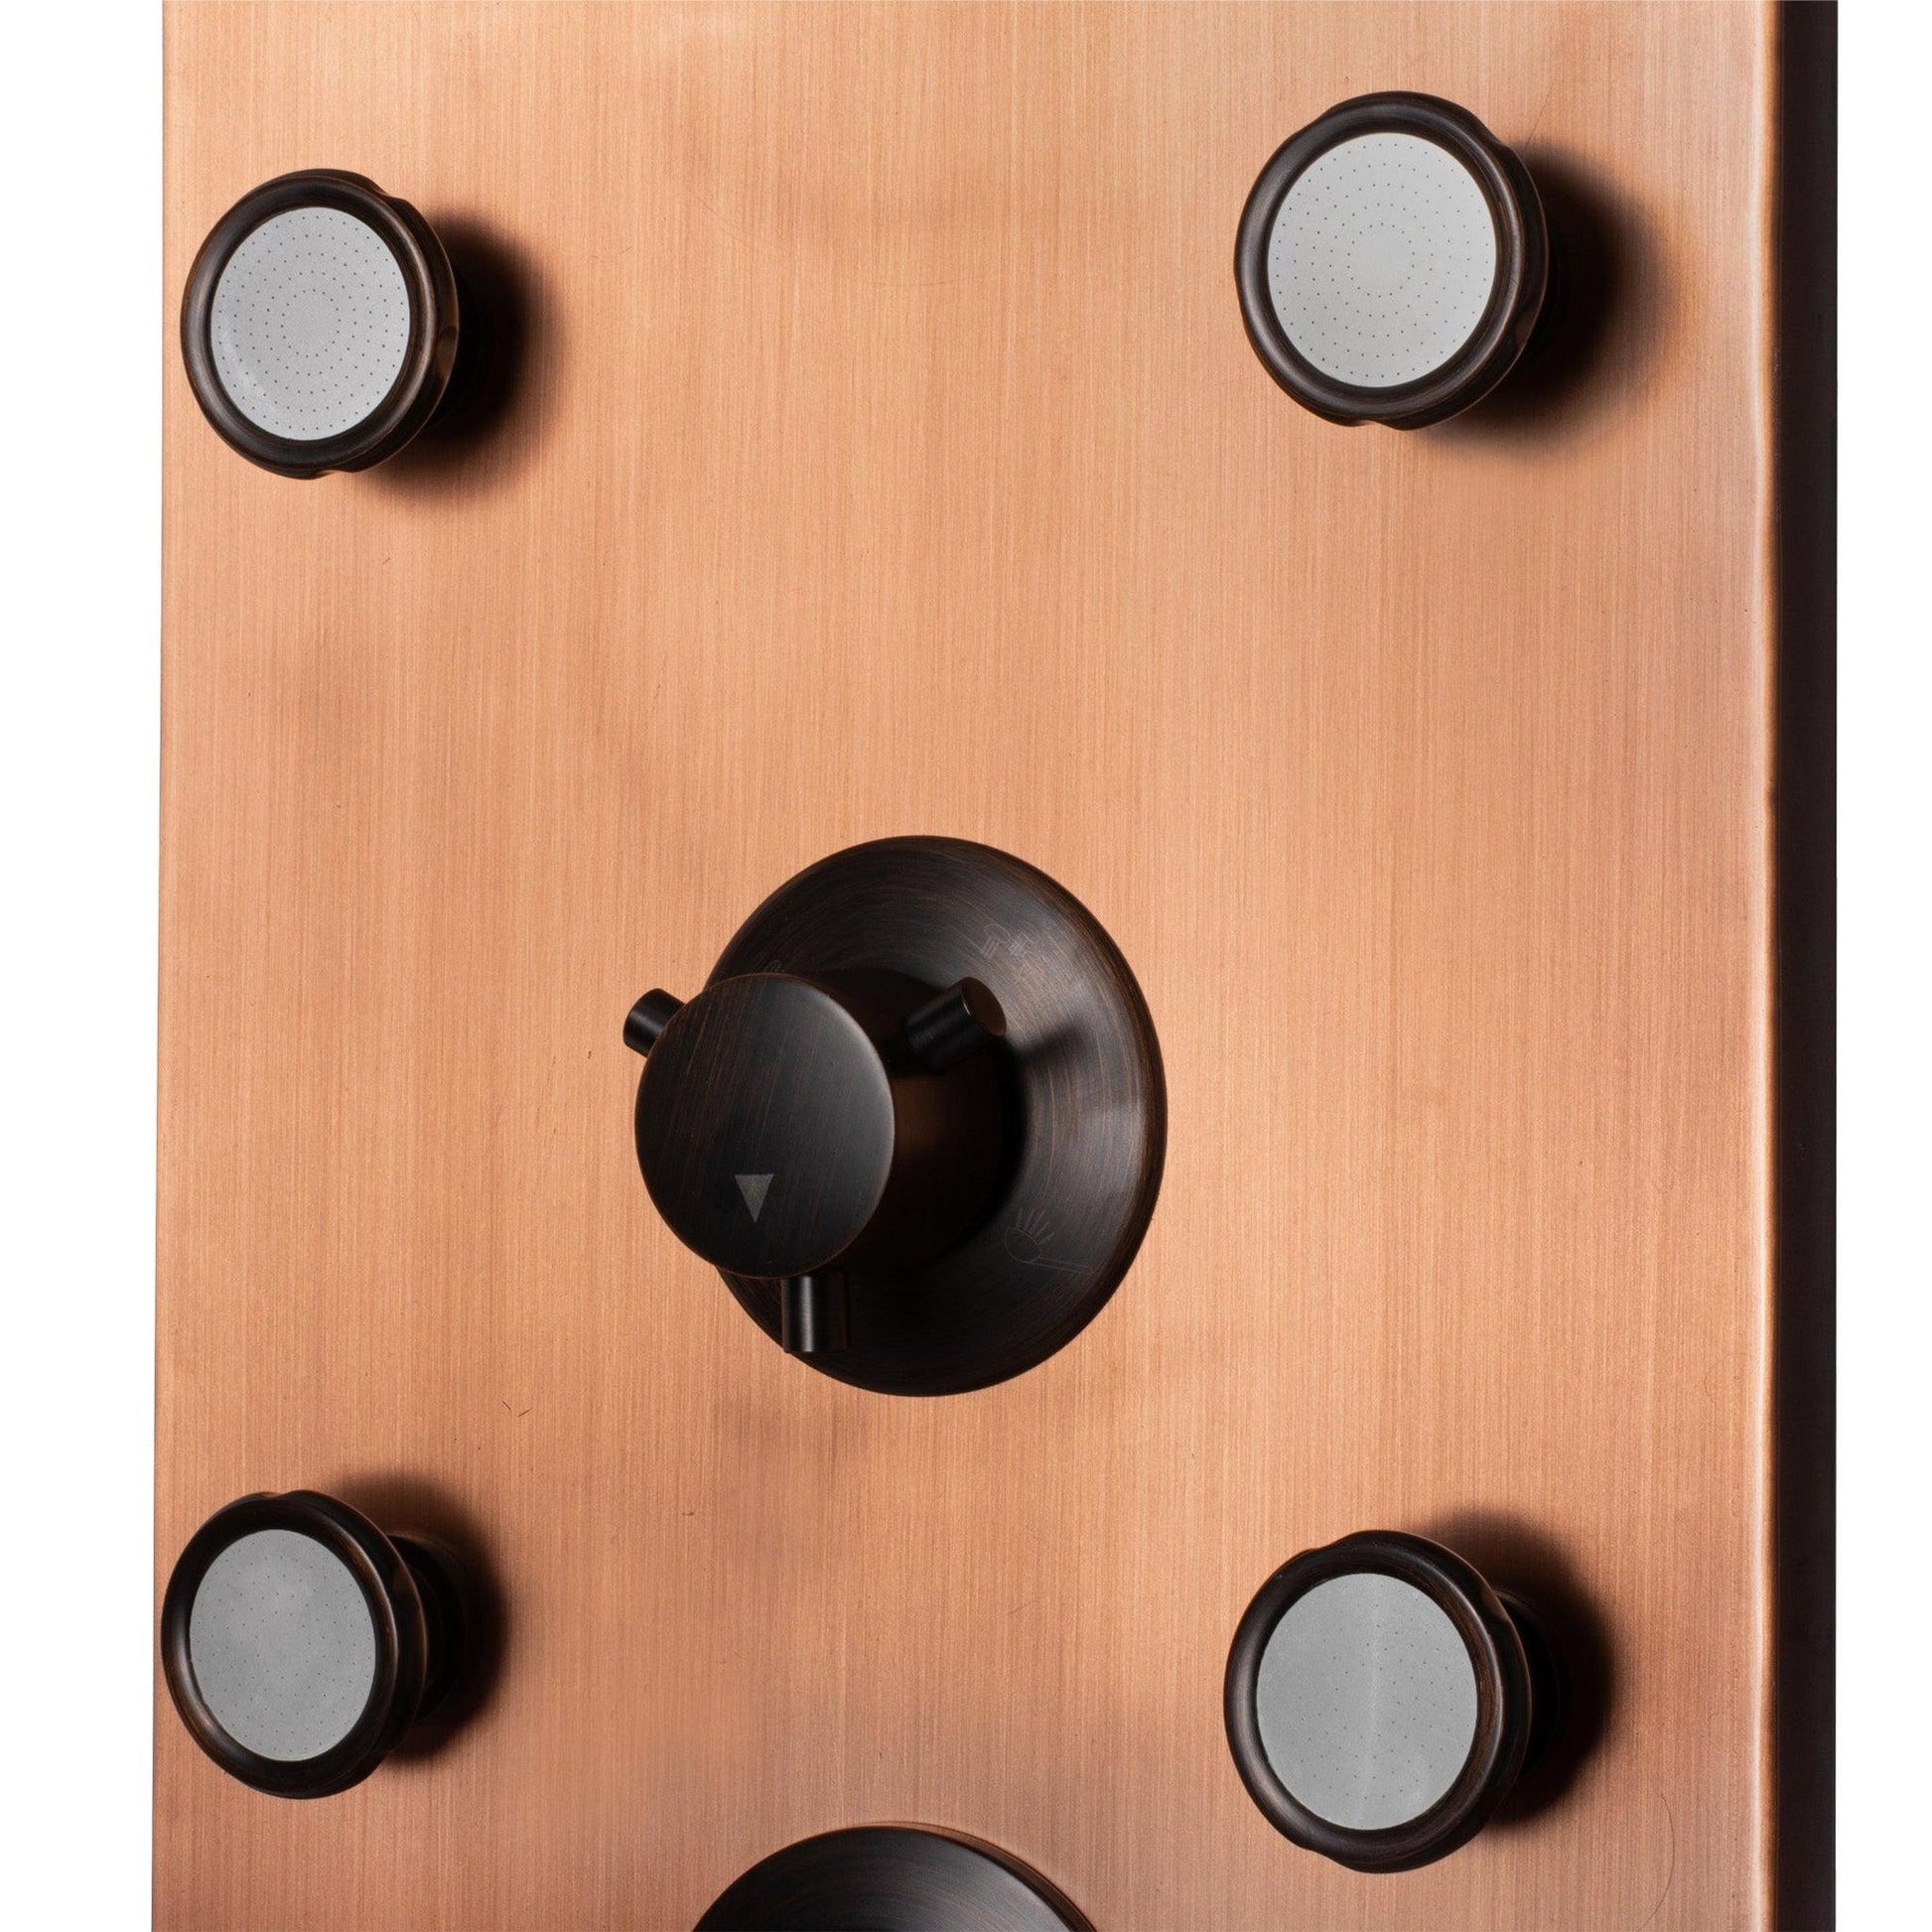 PULSE ShowerSpas La Mesa 52" Rain Shower Panel in Brushed Copper Finish With 6 Single Function Silk Spray Jets and Multi Function Hand Shower